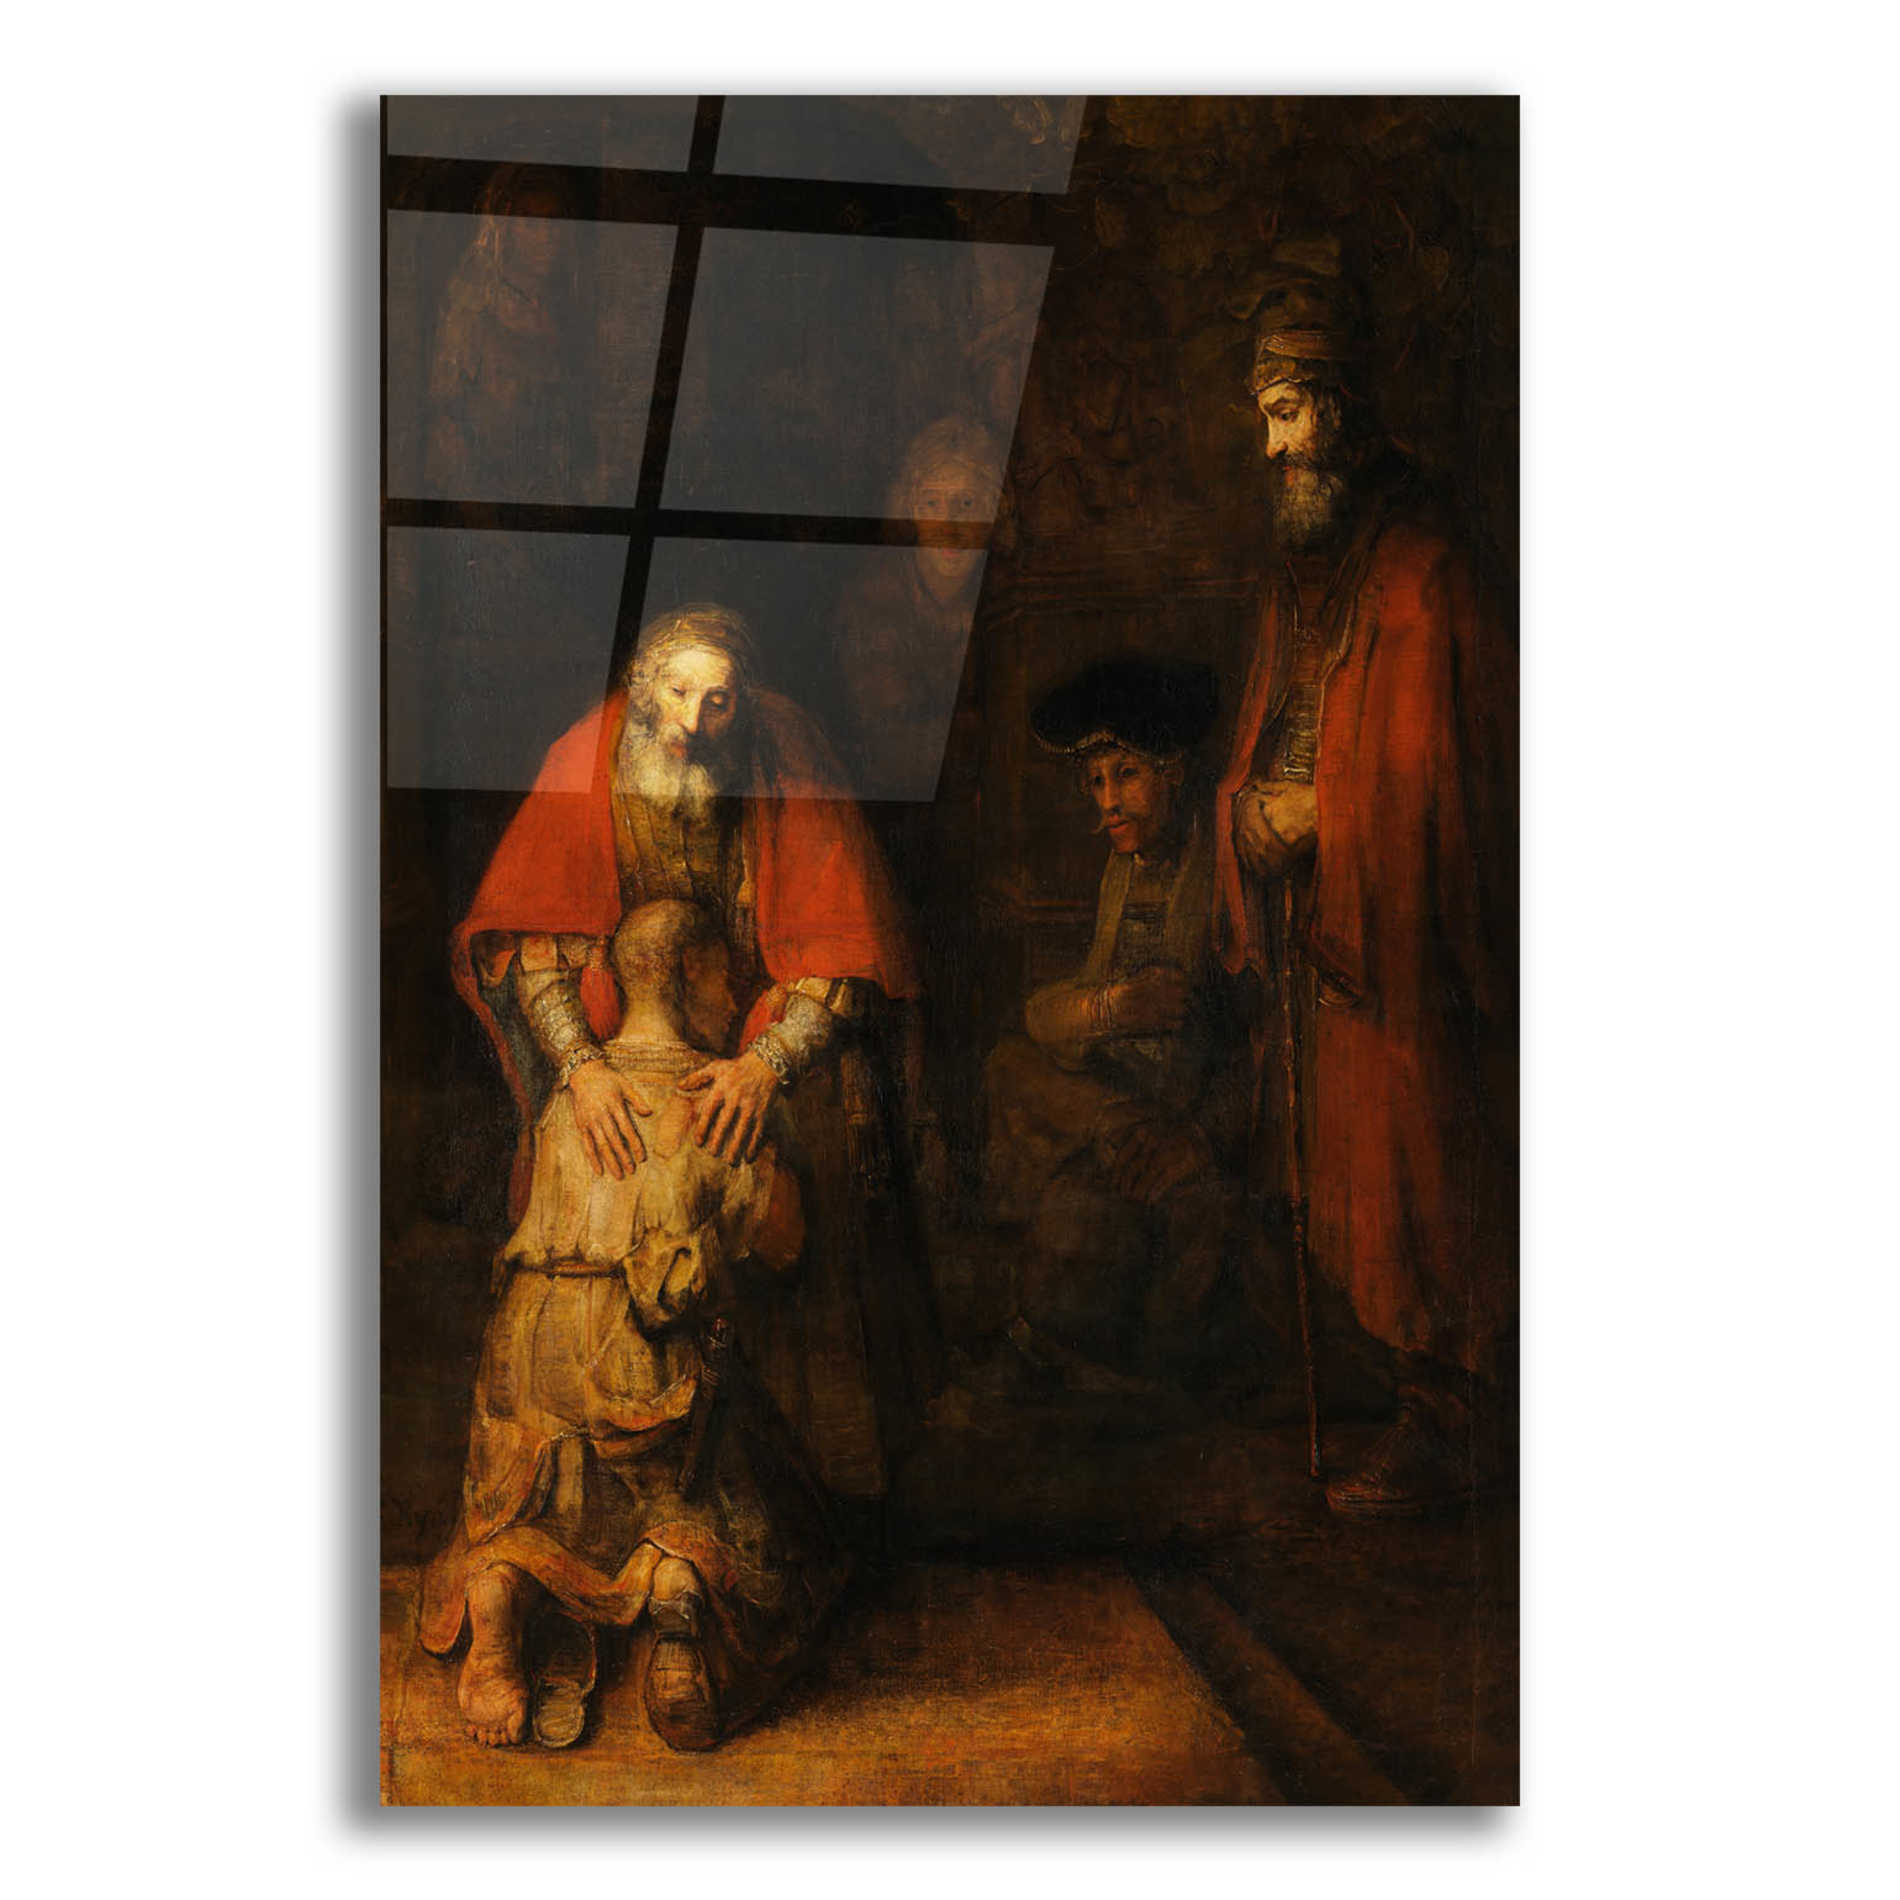 Epic Art 'The Return of the Prodigal Son' by Rembrandt, Acrylic Glass Wall Art,16x24